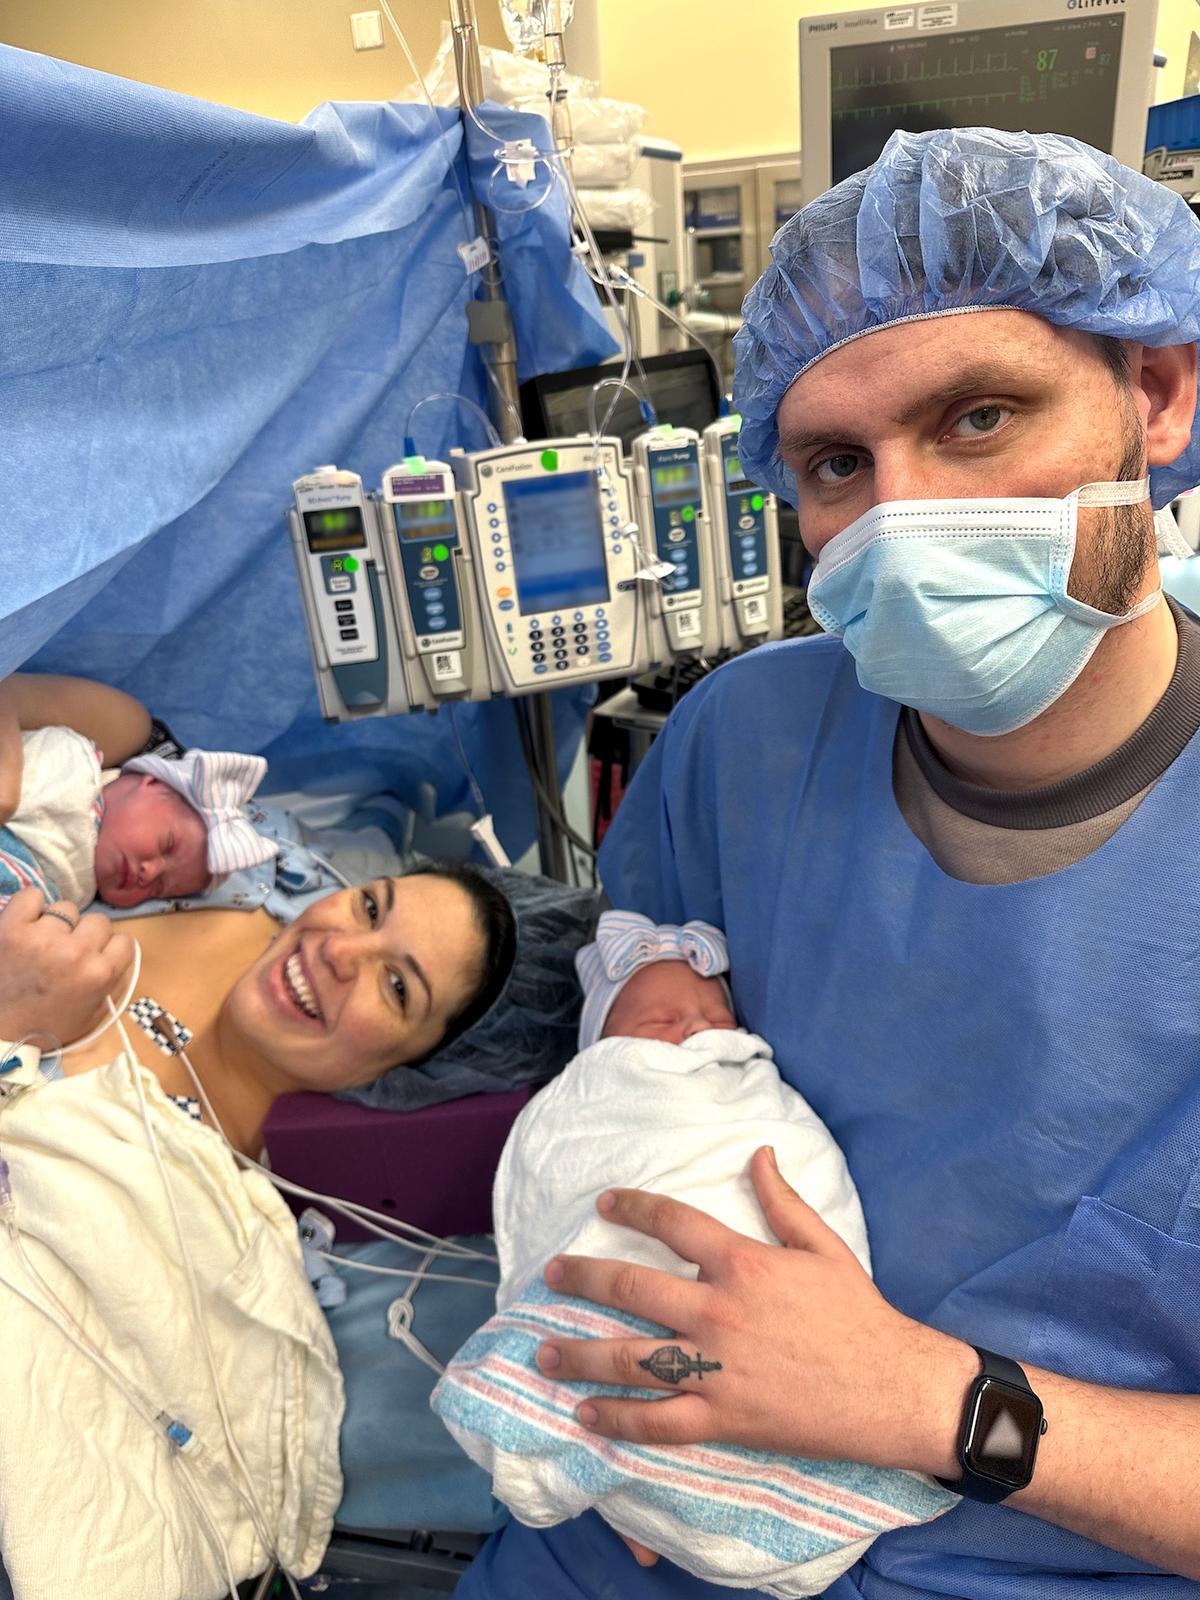 After the C-section, Mrs. Hatcher holds Rebel while her husband holds Roxi. (Courtesy of UAB)